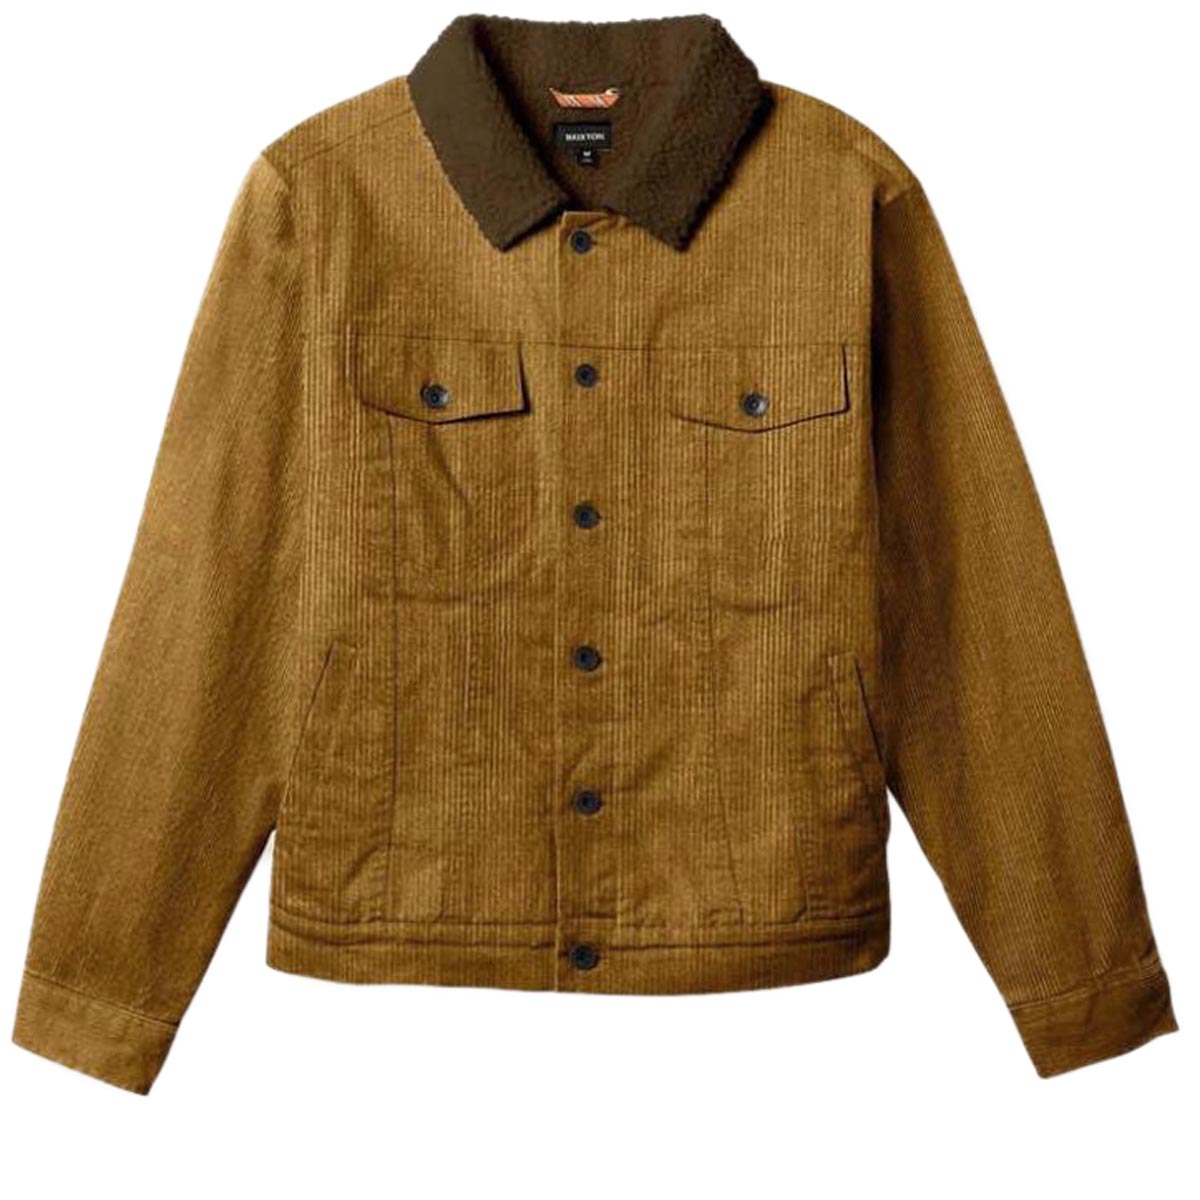 Brixton Builders Cable Lined Trucker Jacket - Khaki Cord image 1